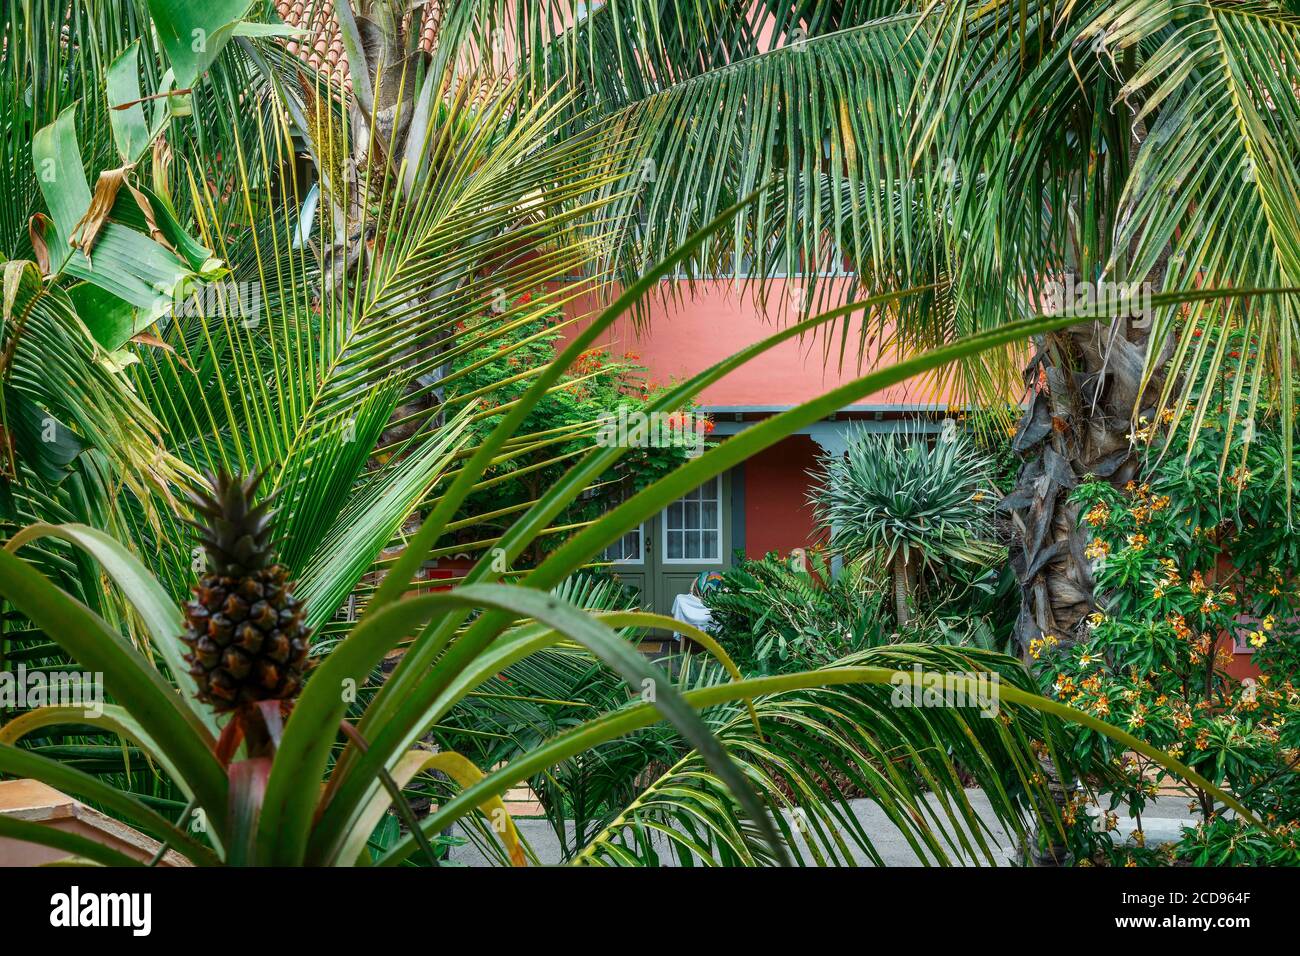 Spain, Canary Islands, La Palma, view of a lush and tropical garden Stock Photo